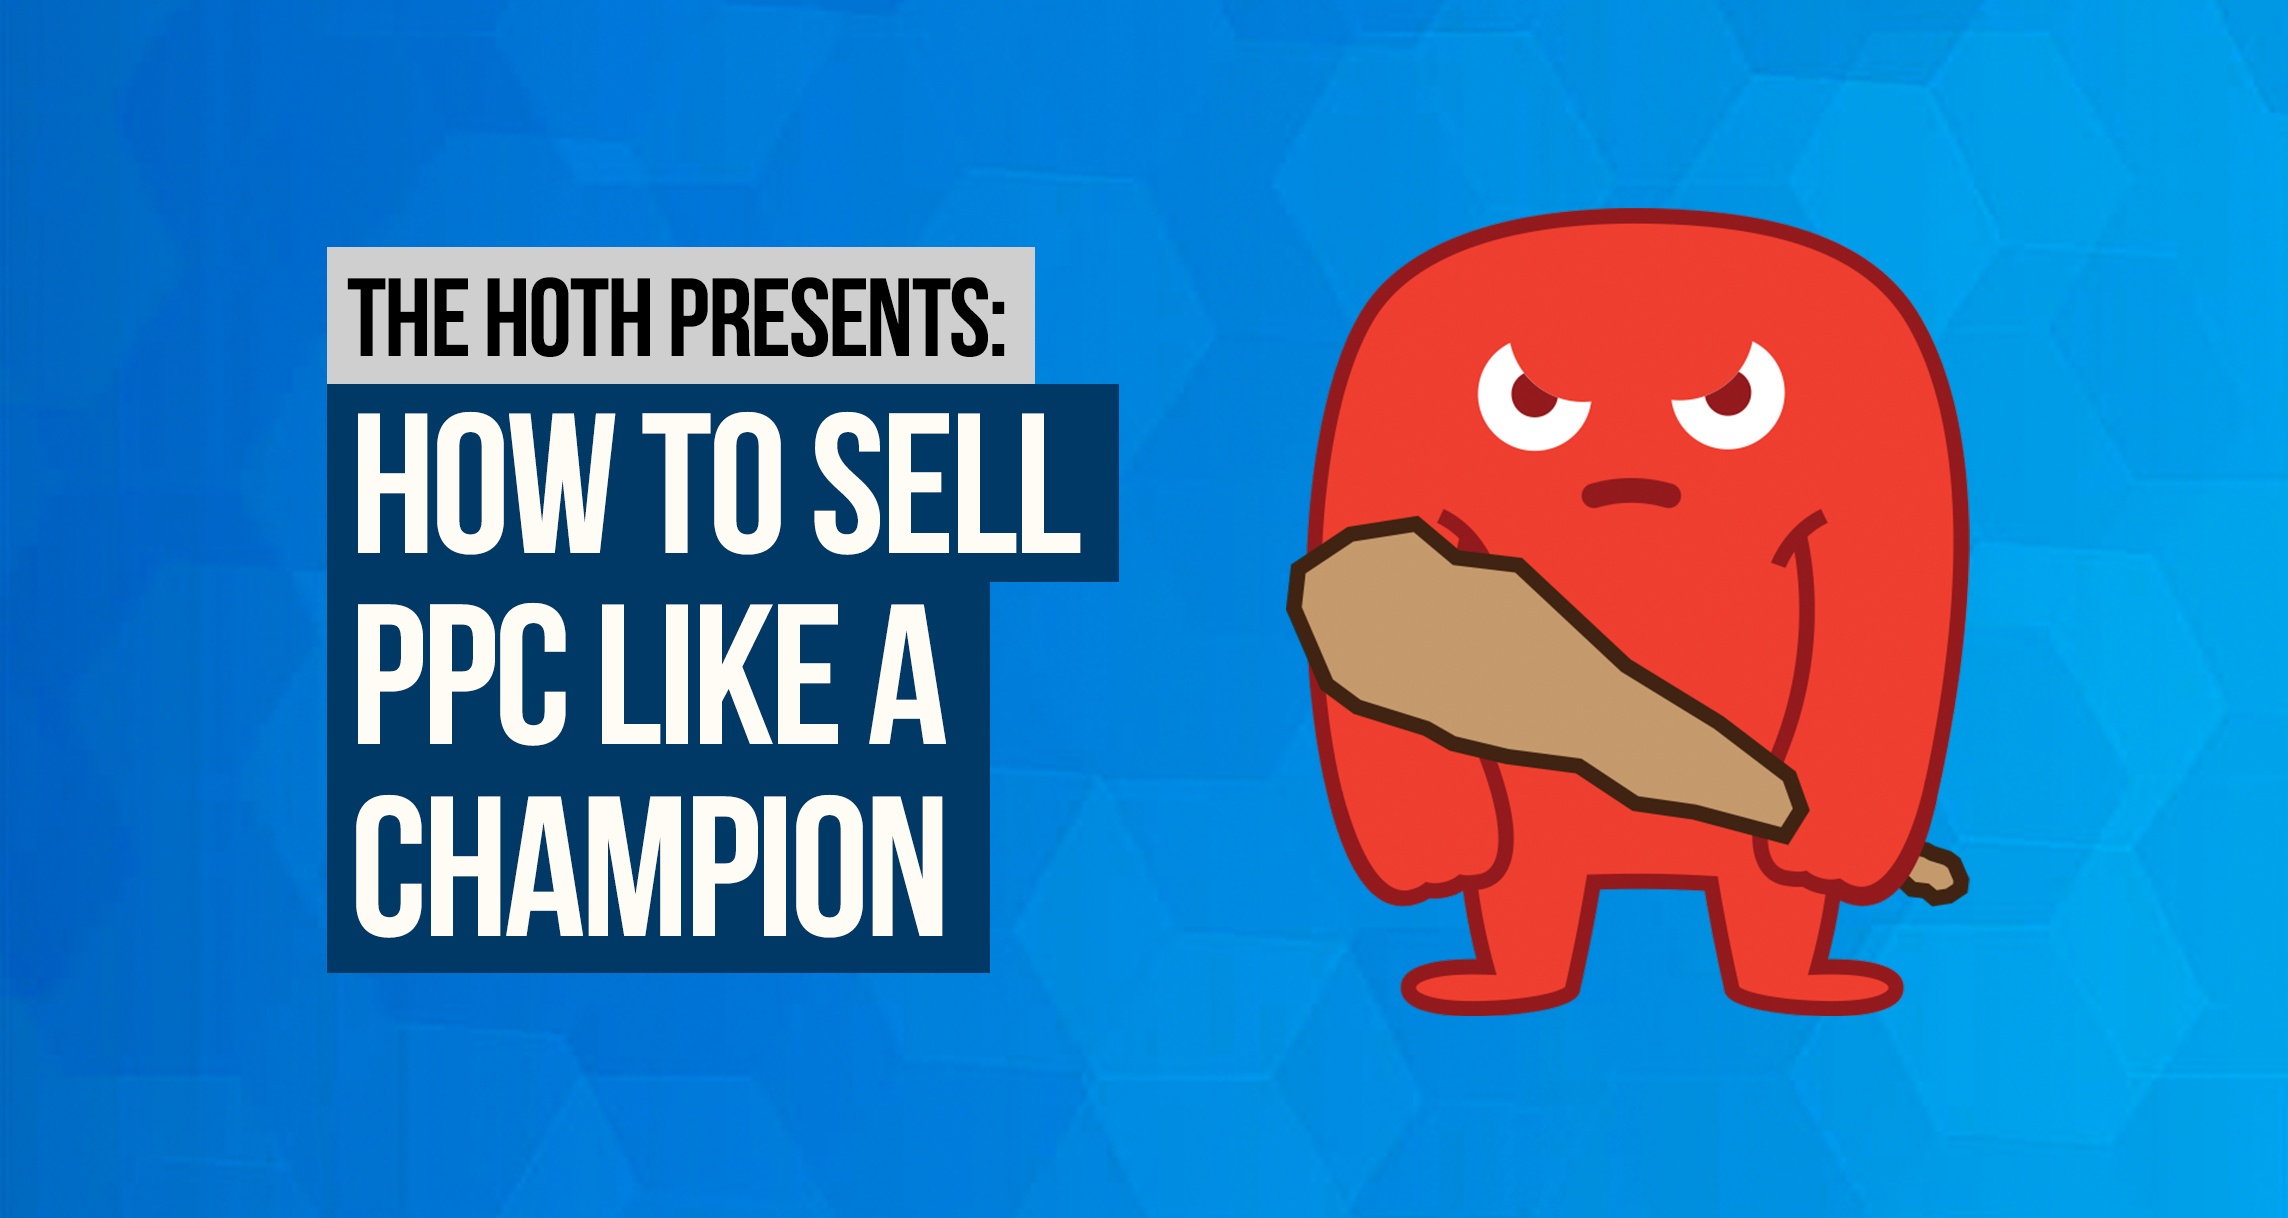 https://www.thehoth.com/wp-content/uploads/2021/09/How-To-Sell-PPC.jpg